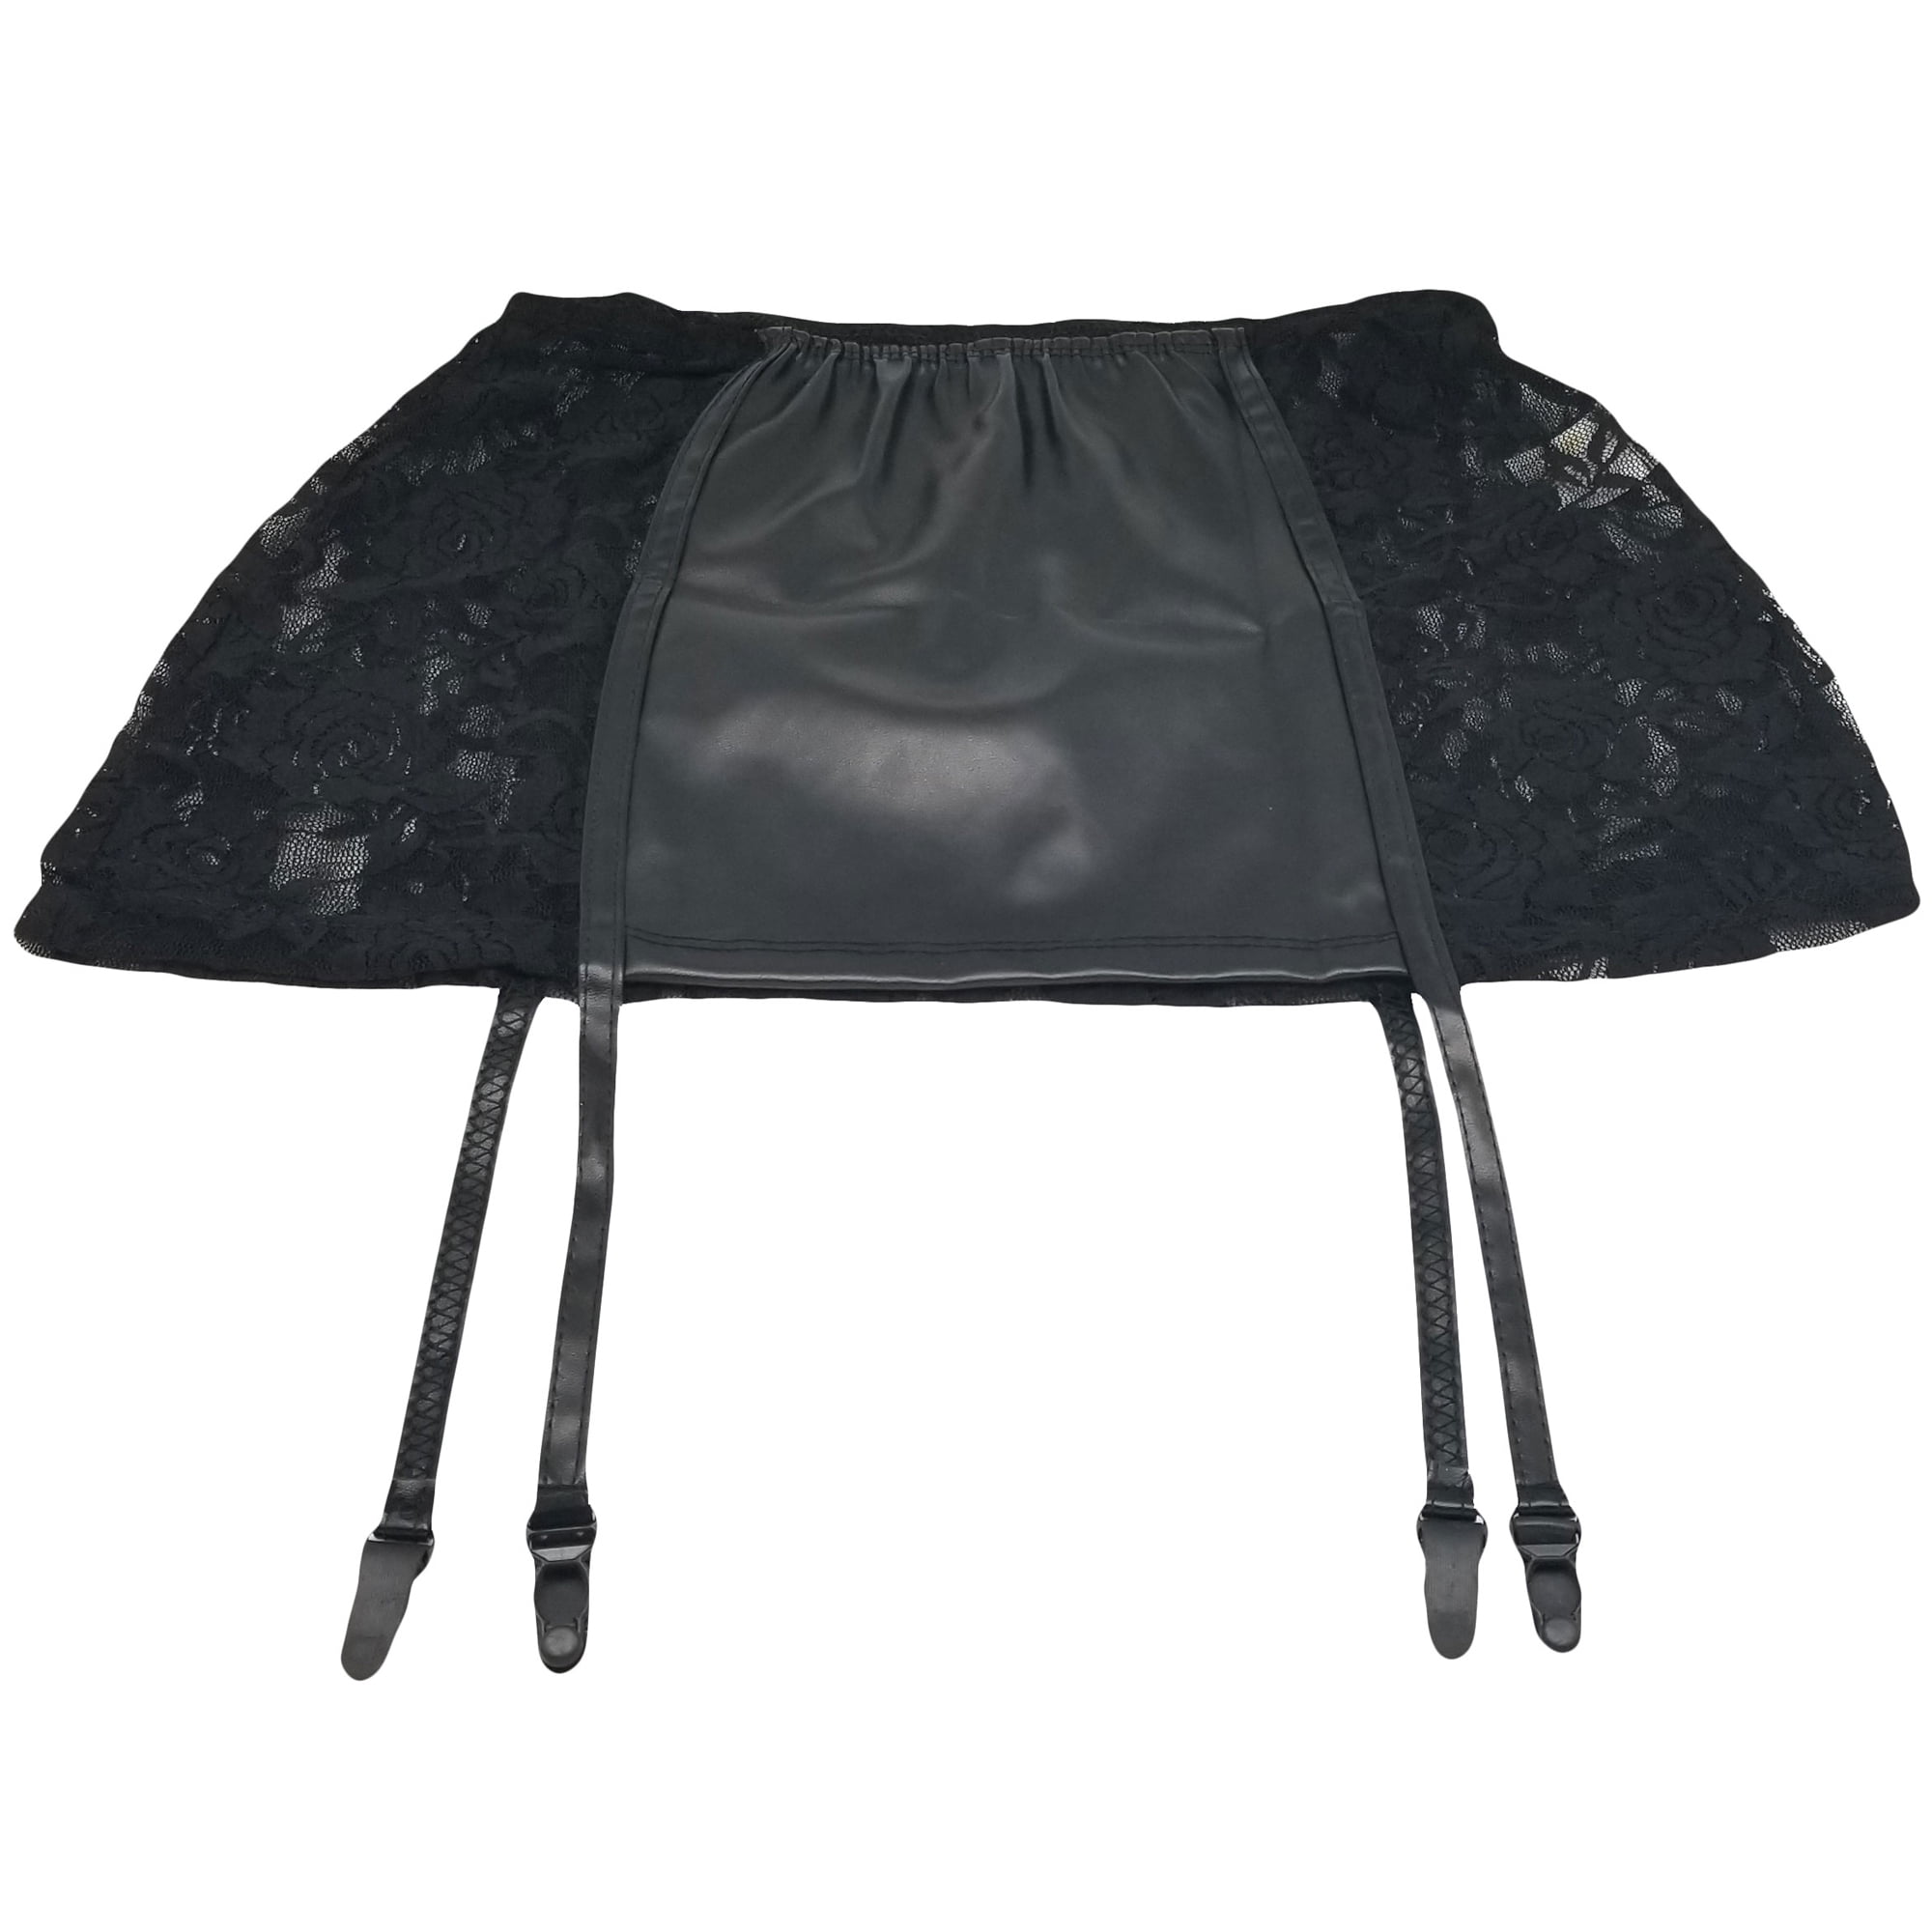 Music Legs 173-BLACK-WHITE Mini Skirt with Attached Garters, Black